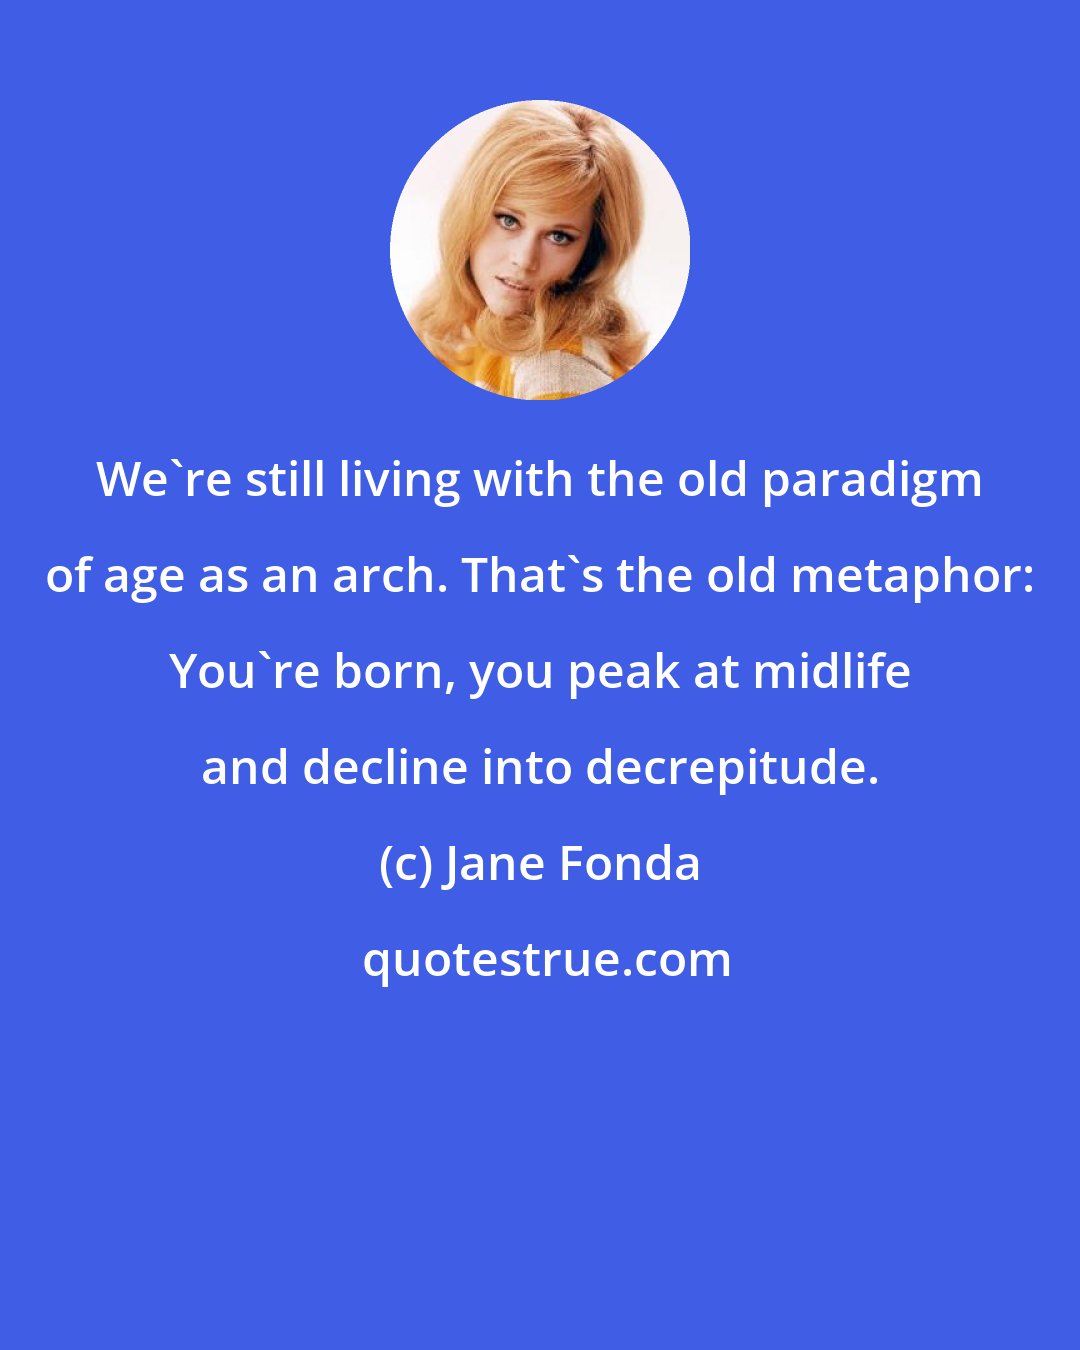 Jane Fonda: We're still living with the old paradigm of age as an arch. That's the old metaphor: You're born, you peak at midlife and decline into decrepitude.